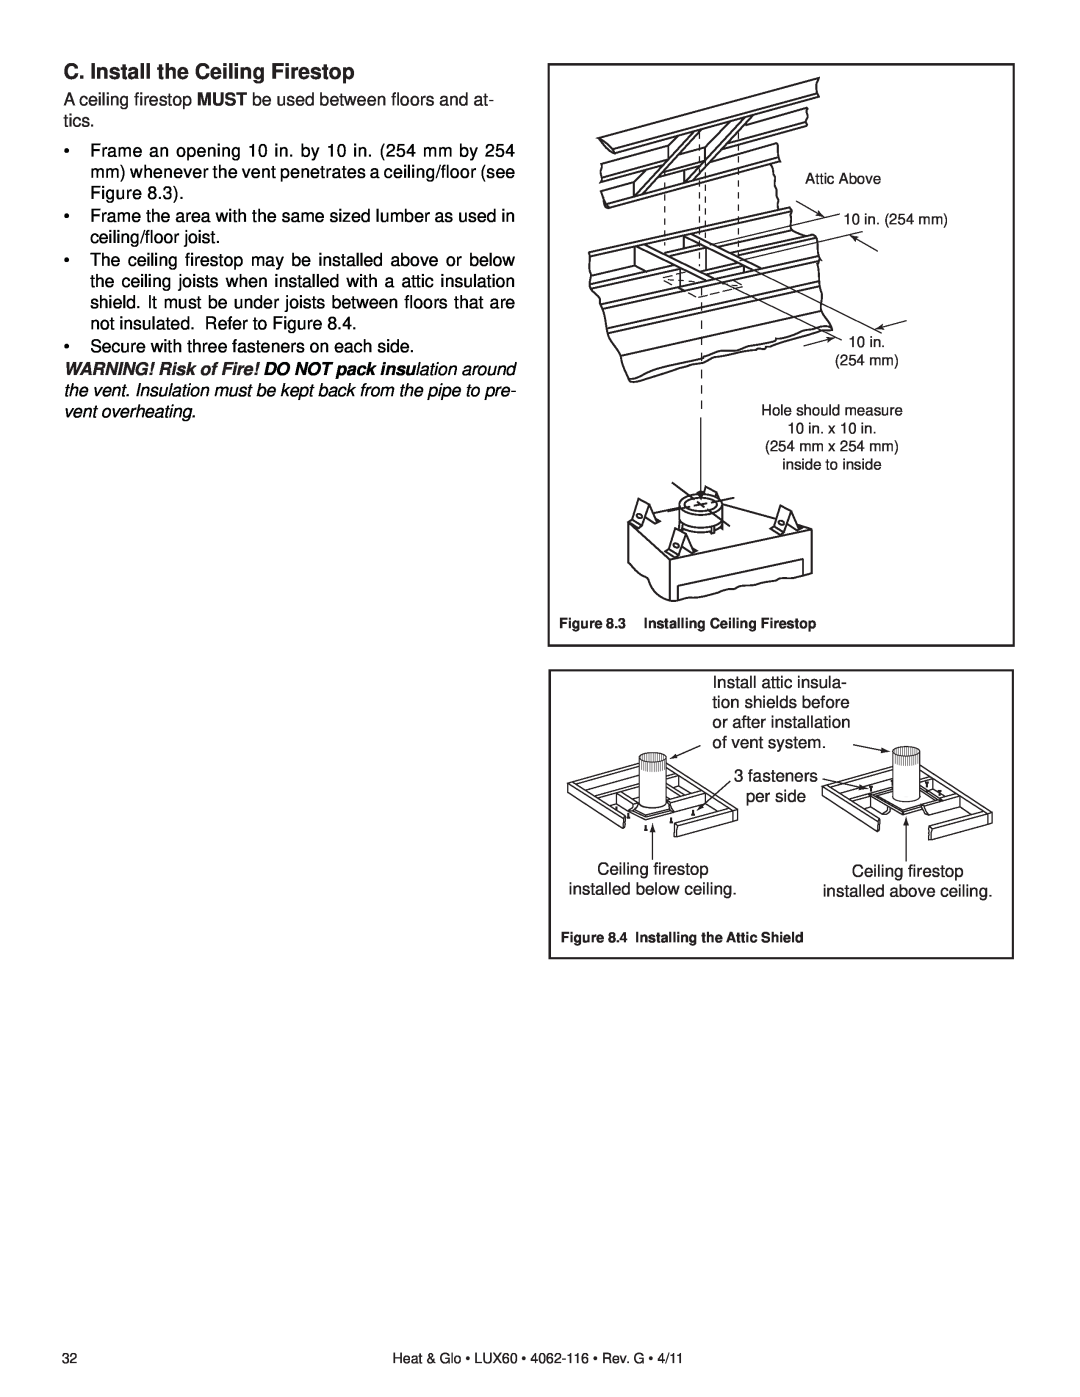 Heat & Glo LifeStyle LUX60 owner manual C. Install the Ceiling Firestop 